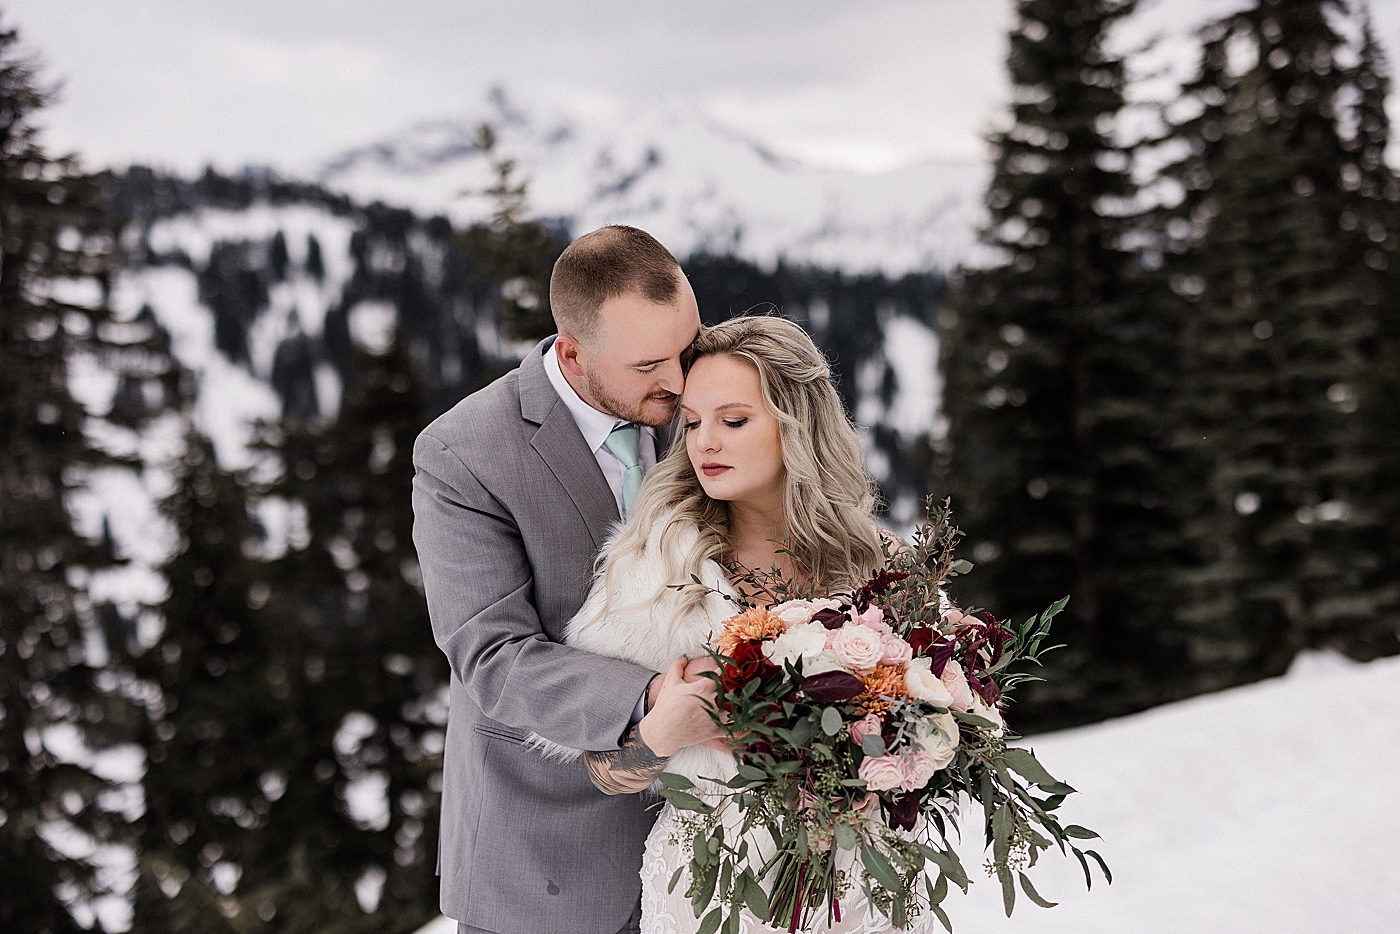 Bride and groom wedding portraits in the snow at Mount Rainier National Park. Photo by Megan Montalvo Photography.